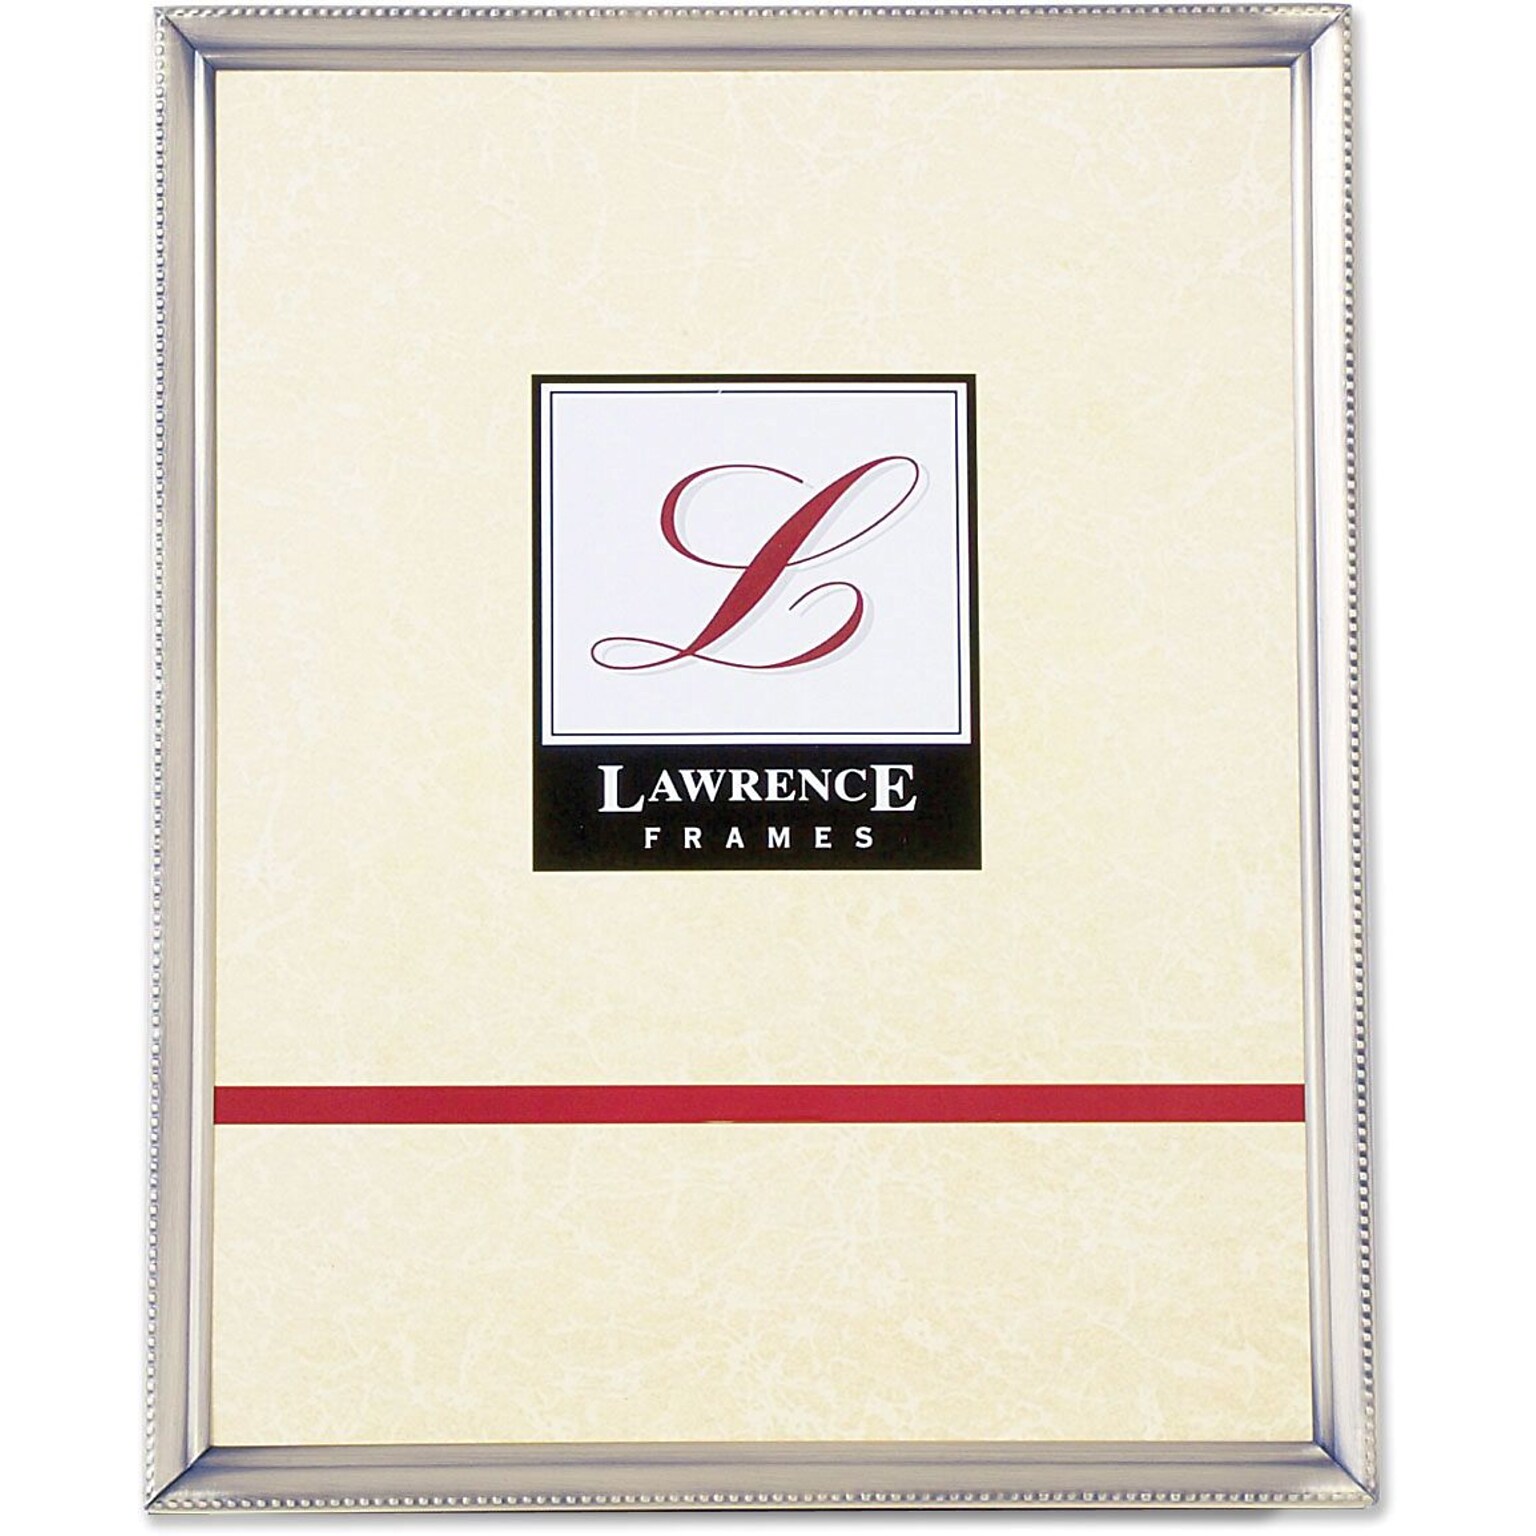 Lawrence Frames 8 x 10 Metal Pewter Picture Frame (11580)